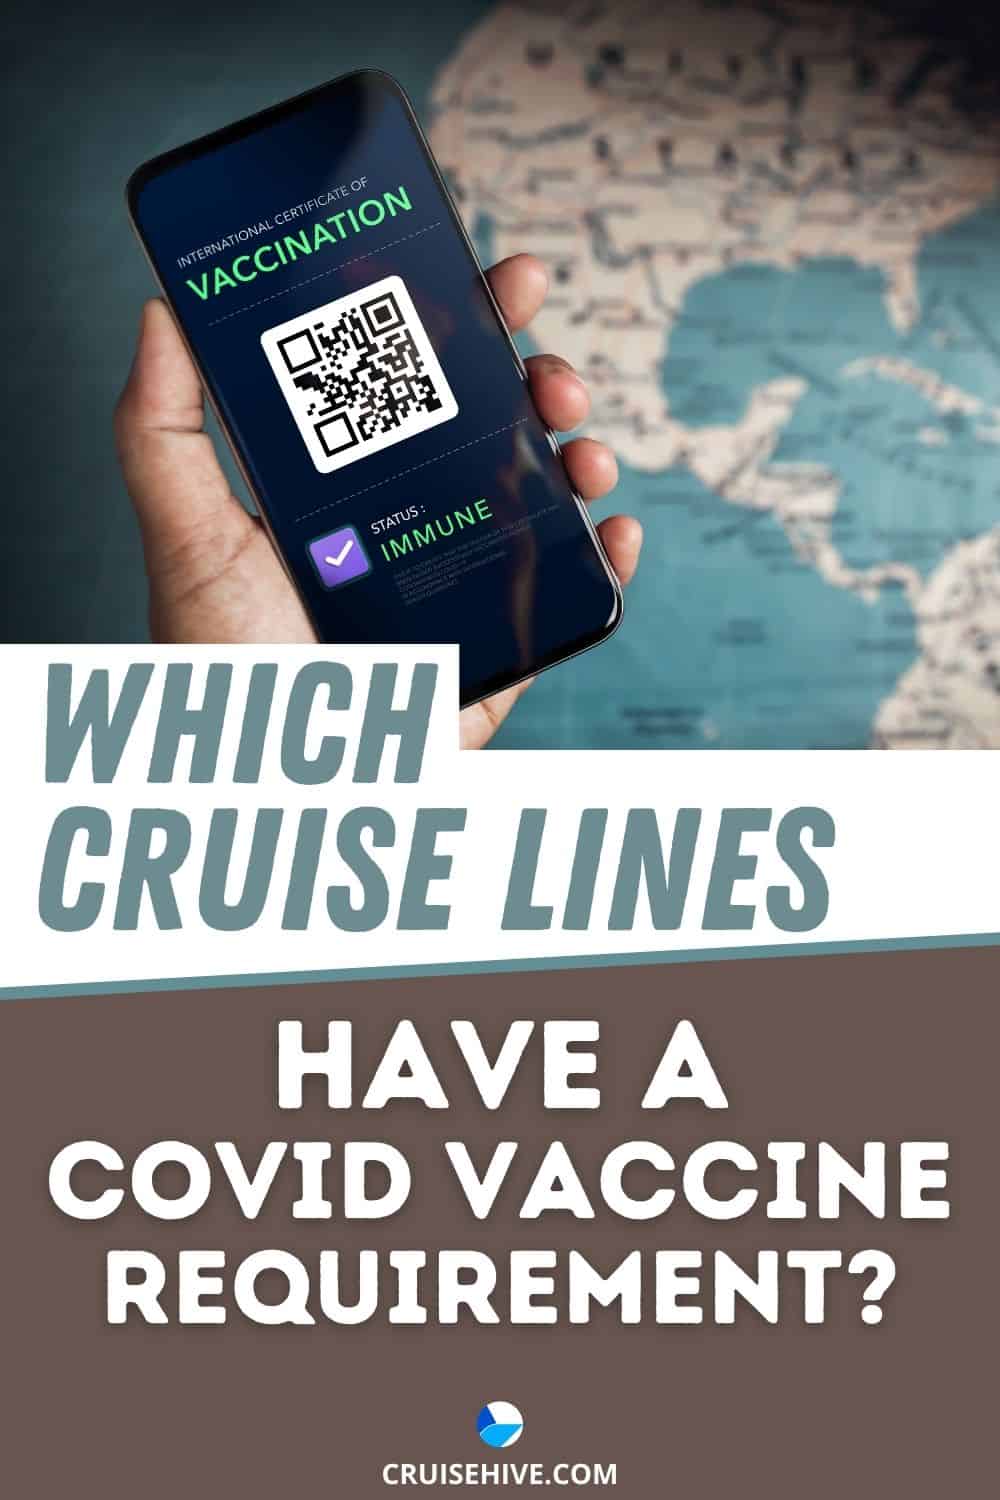 Which Cruise Lines Have a COVID Vaccine Requirement?